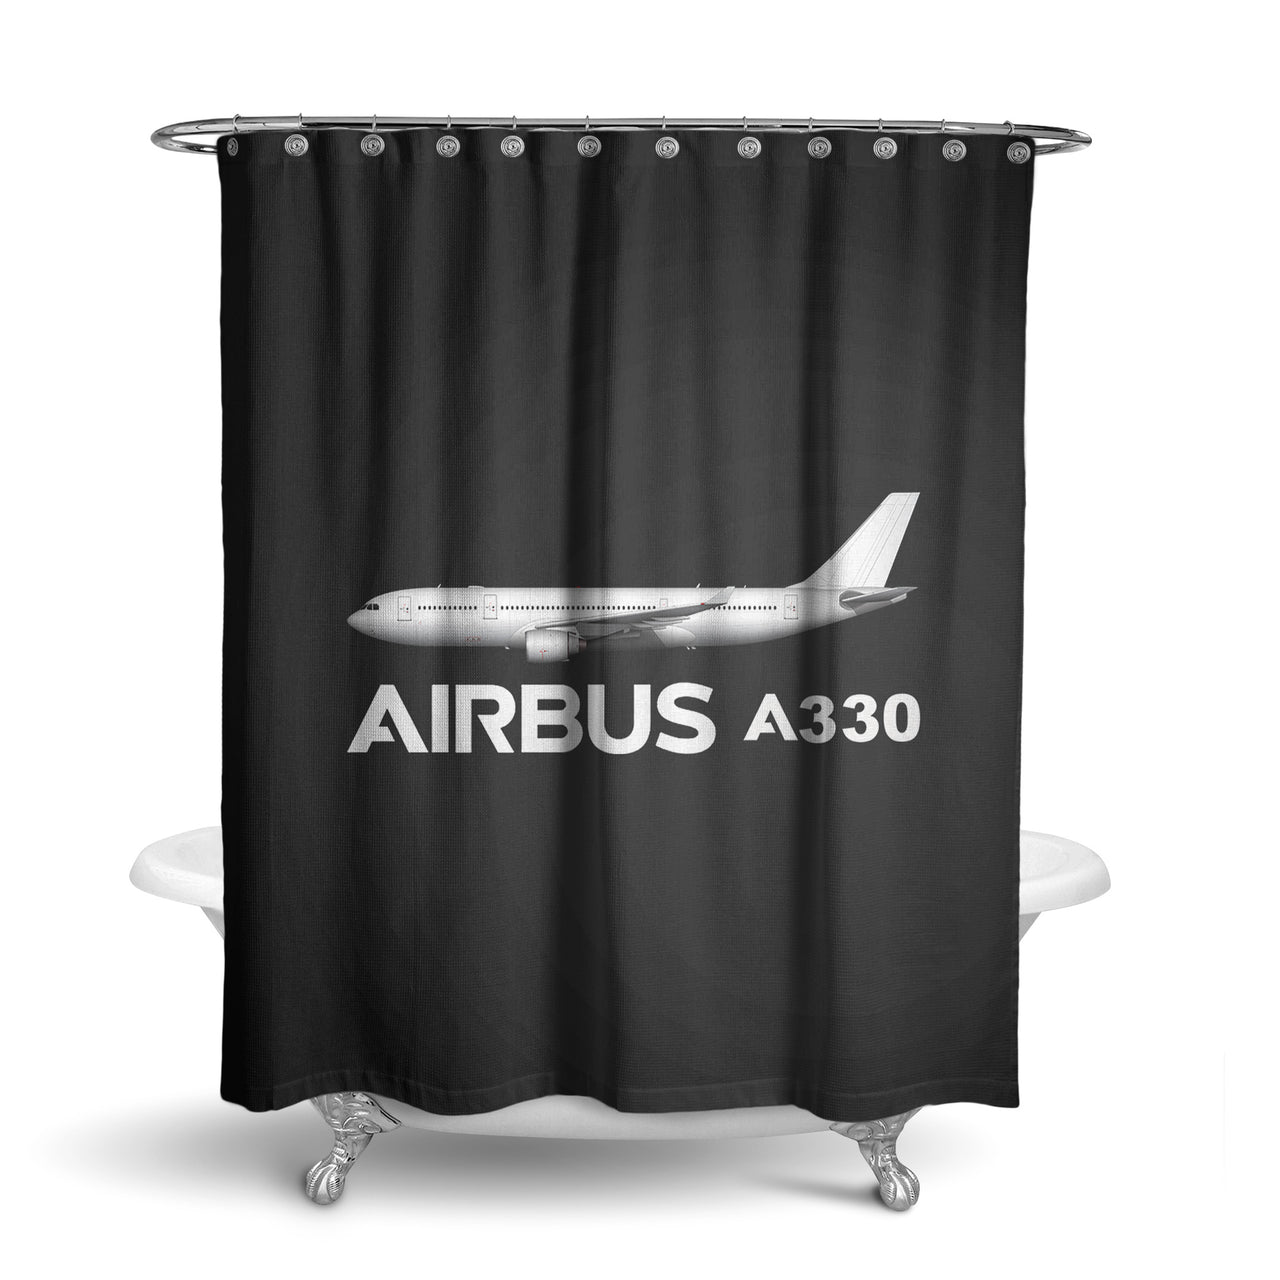 The Airbus A330 Designed Shower Curtains